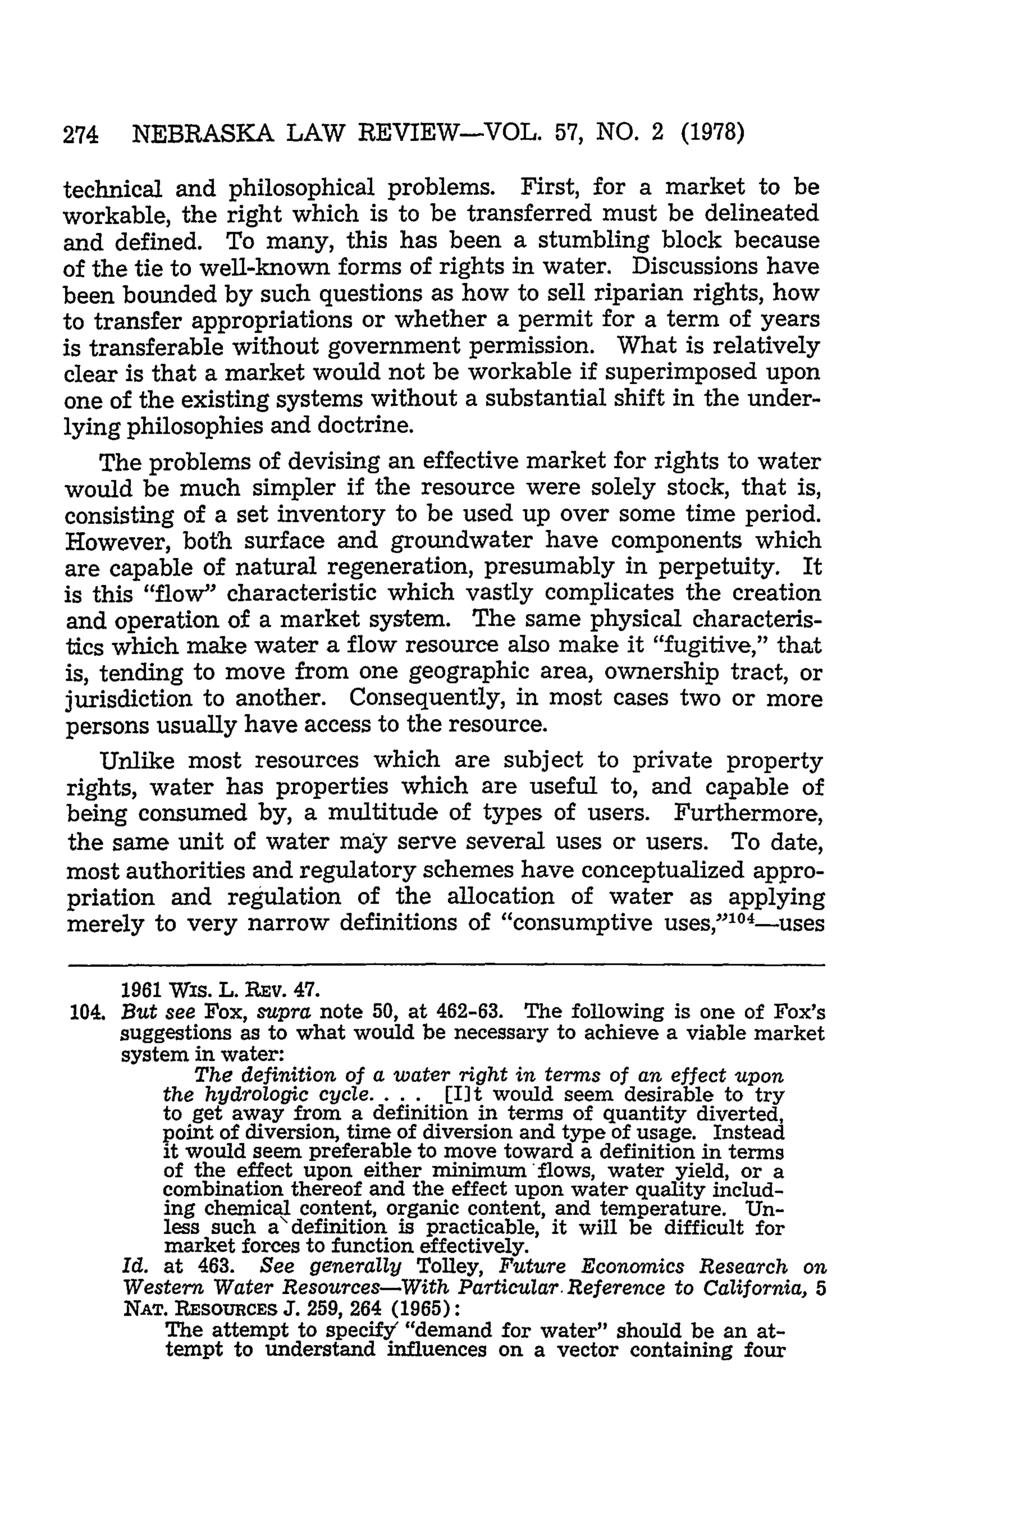 274 NEBRASKA LAW REVIEW-VOL. 57, NO. 2 (1978) technical and philosophical problems. First, for a market to be workable, the right which is to be transferred must be delineated and defined.